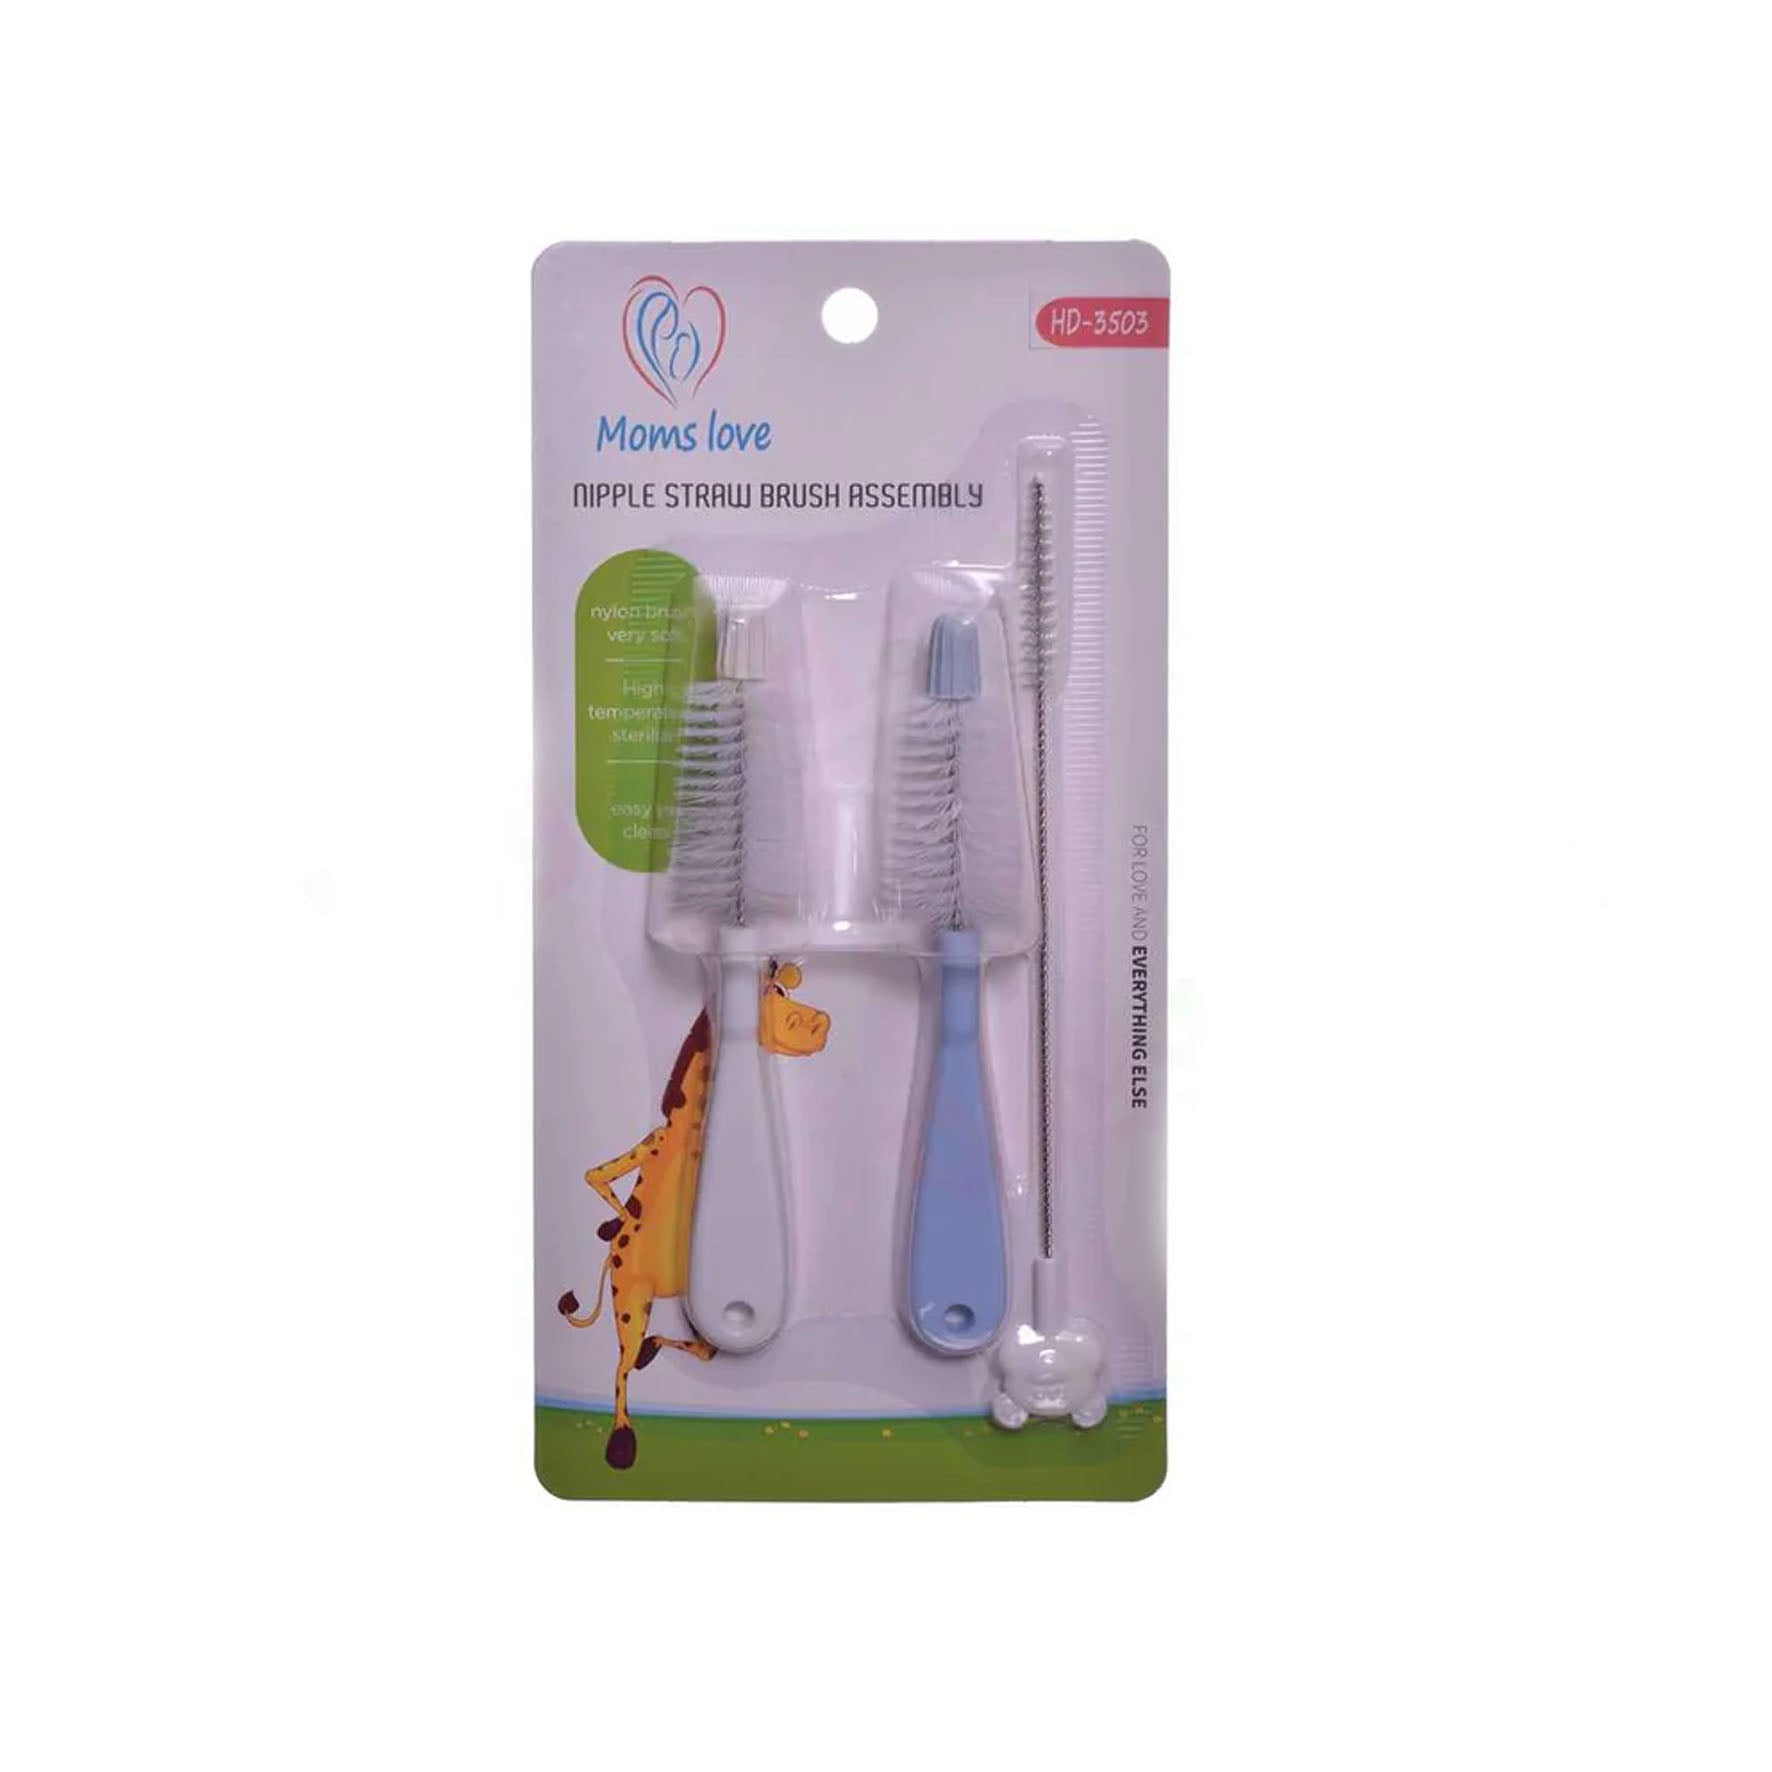 Complete Cleaning Set for Your Baby's Milk and Juice/Water Bottles. 2 Brushes,1 Nipple and Bottle Base Cleaning Brush and 1 Straw Cleaning Brush